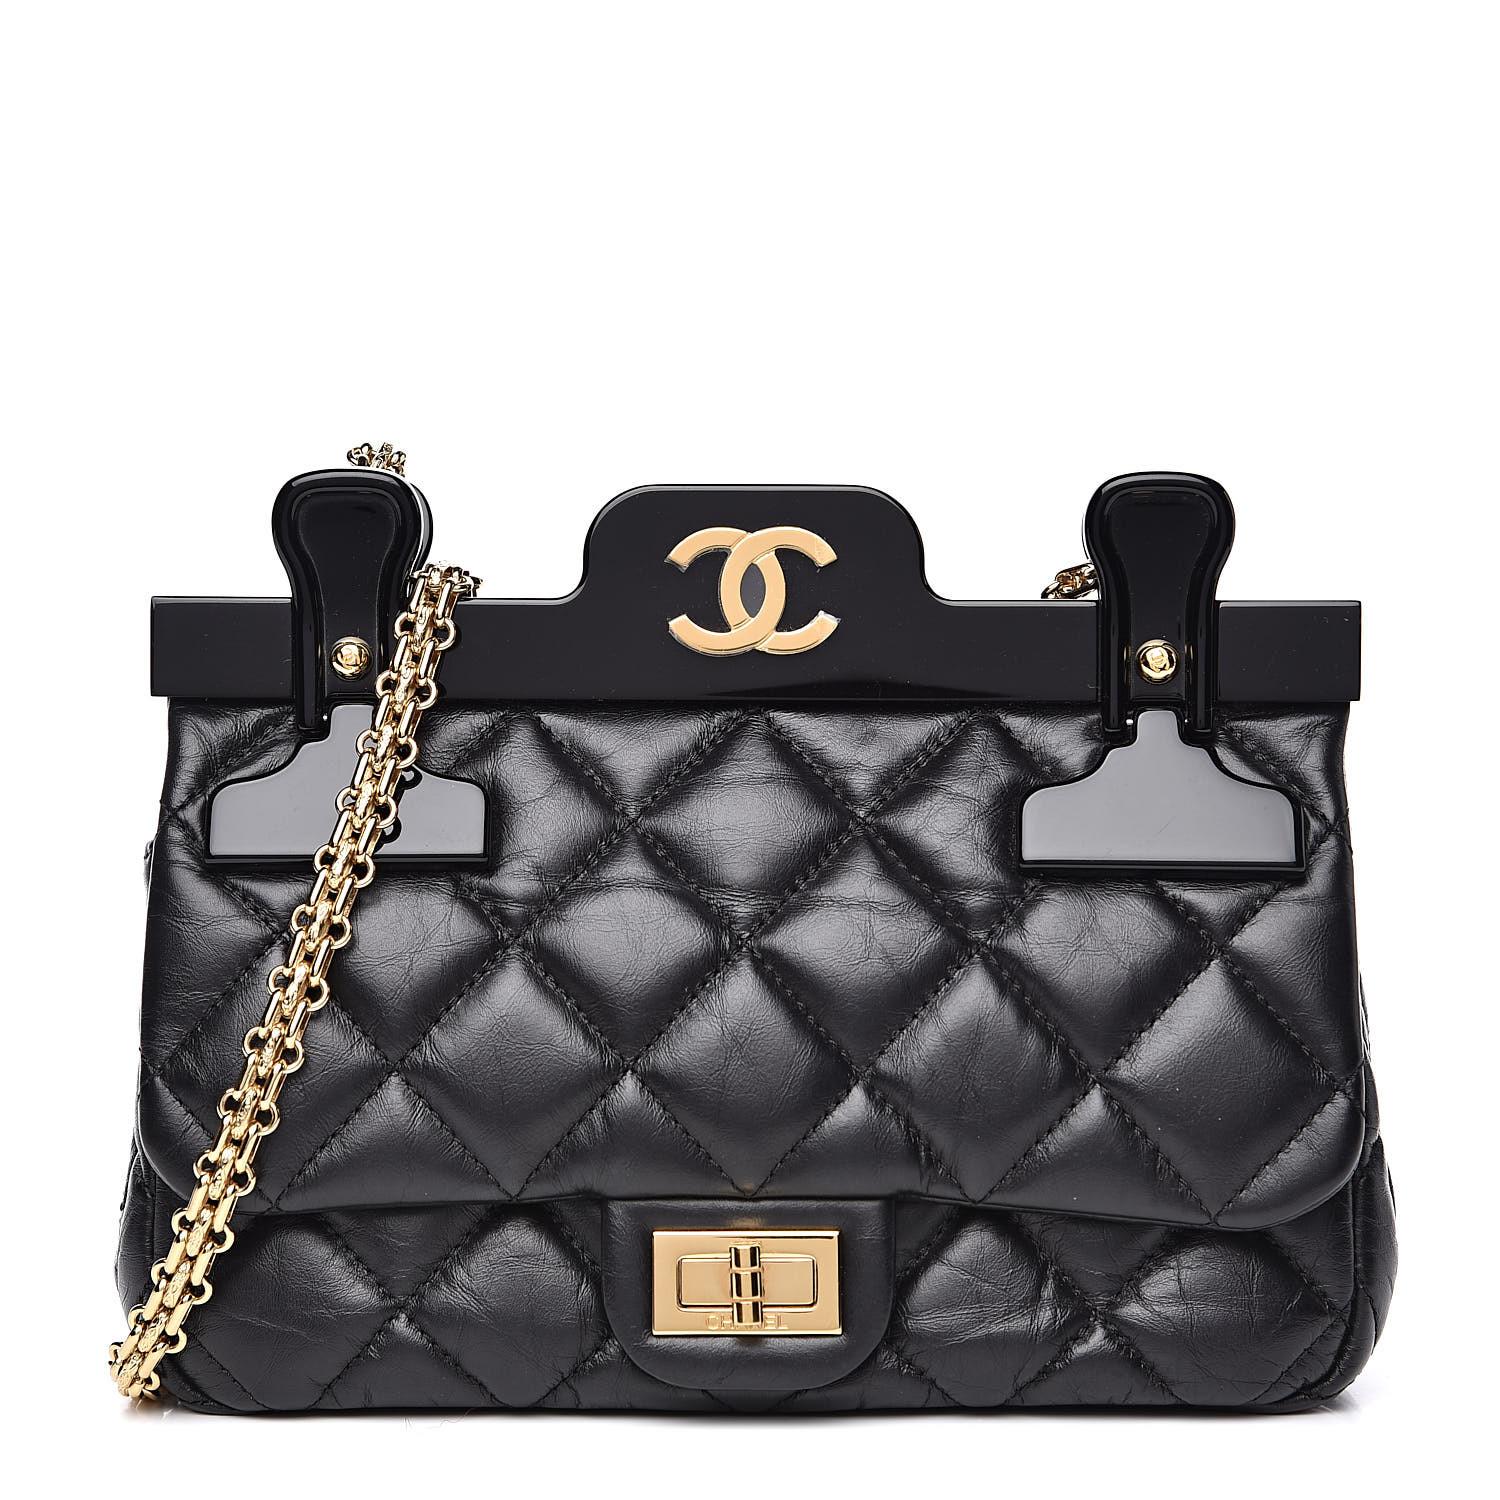 Chanel 2016 Runway Rare Small Hanger Limited Edition Reissue Classic Flap Bag For Sale 1